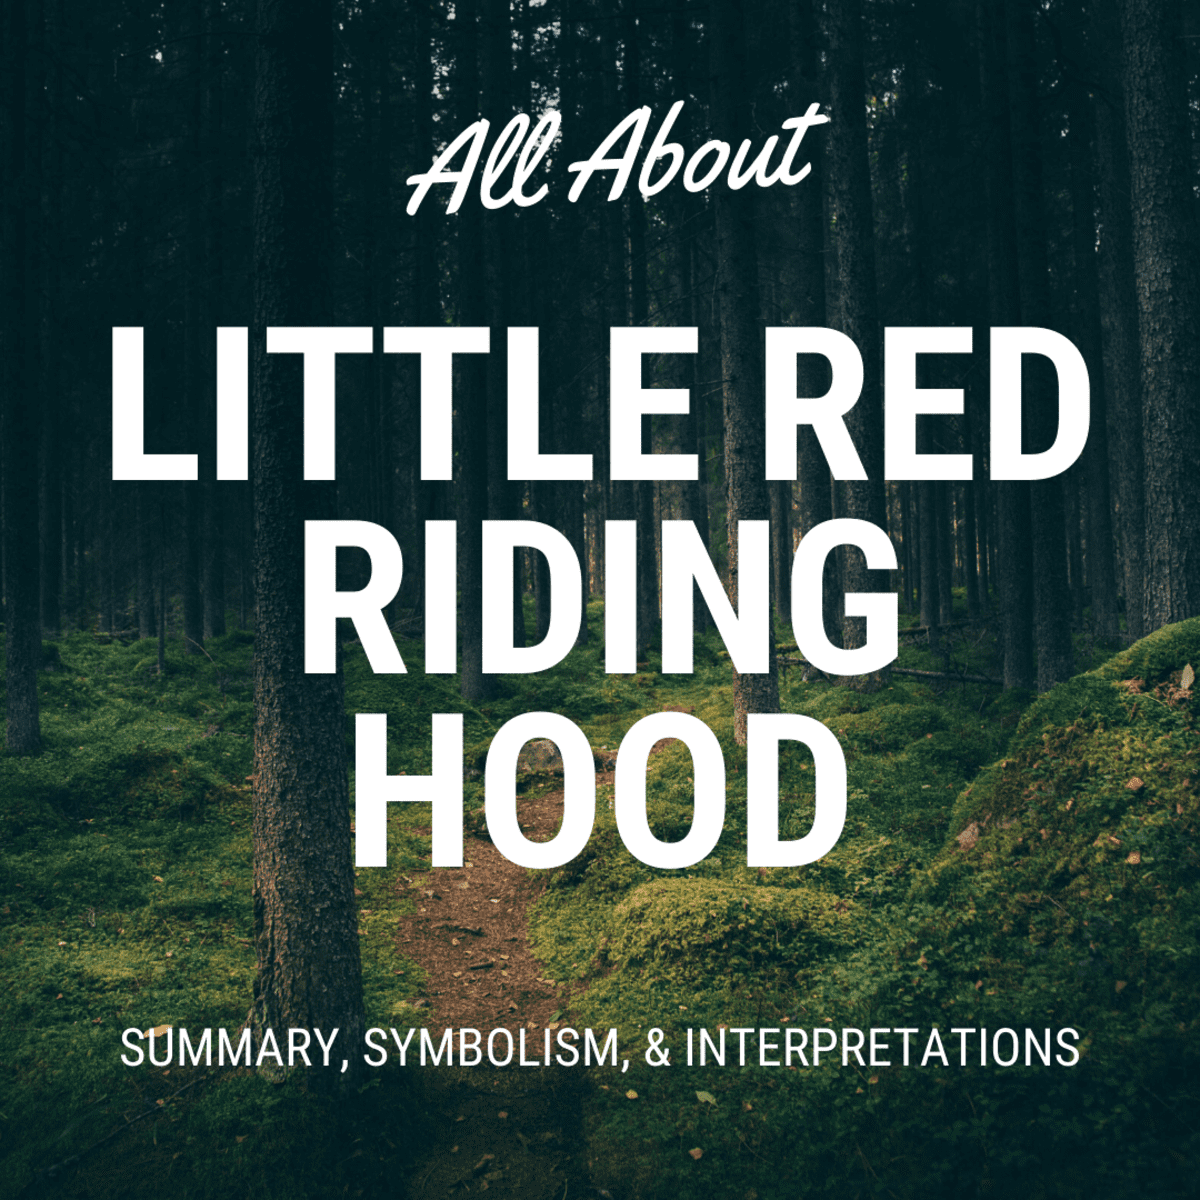 Little Red Riding Hood: The Summary and Symbols - Owlcation